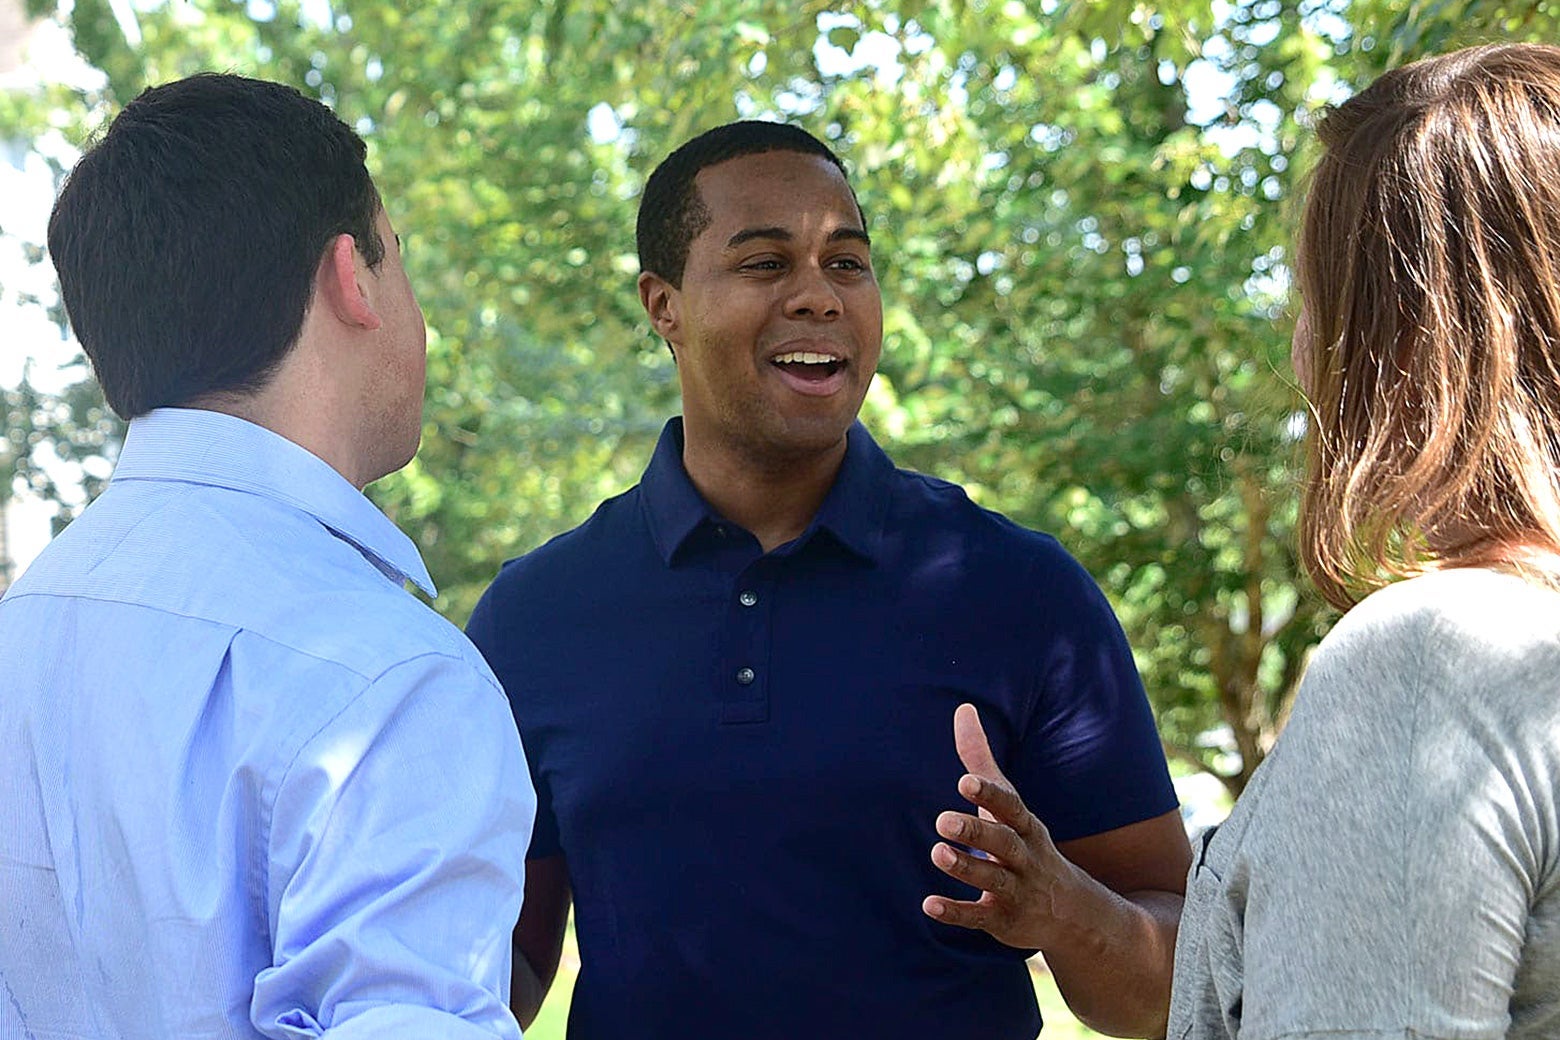 North Carolina state Rep. Chaz Beasley speaks to two people in this campaign photo.